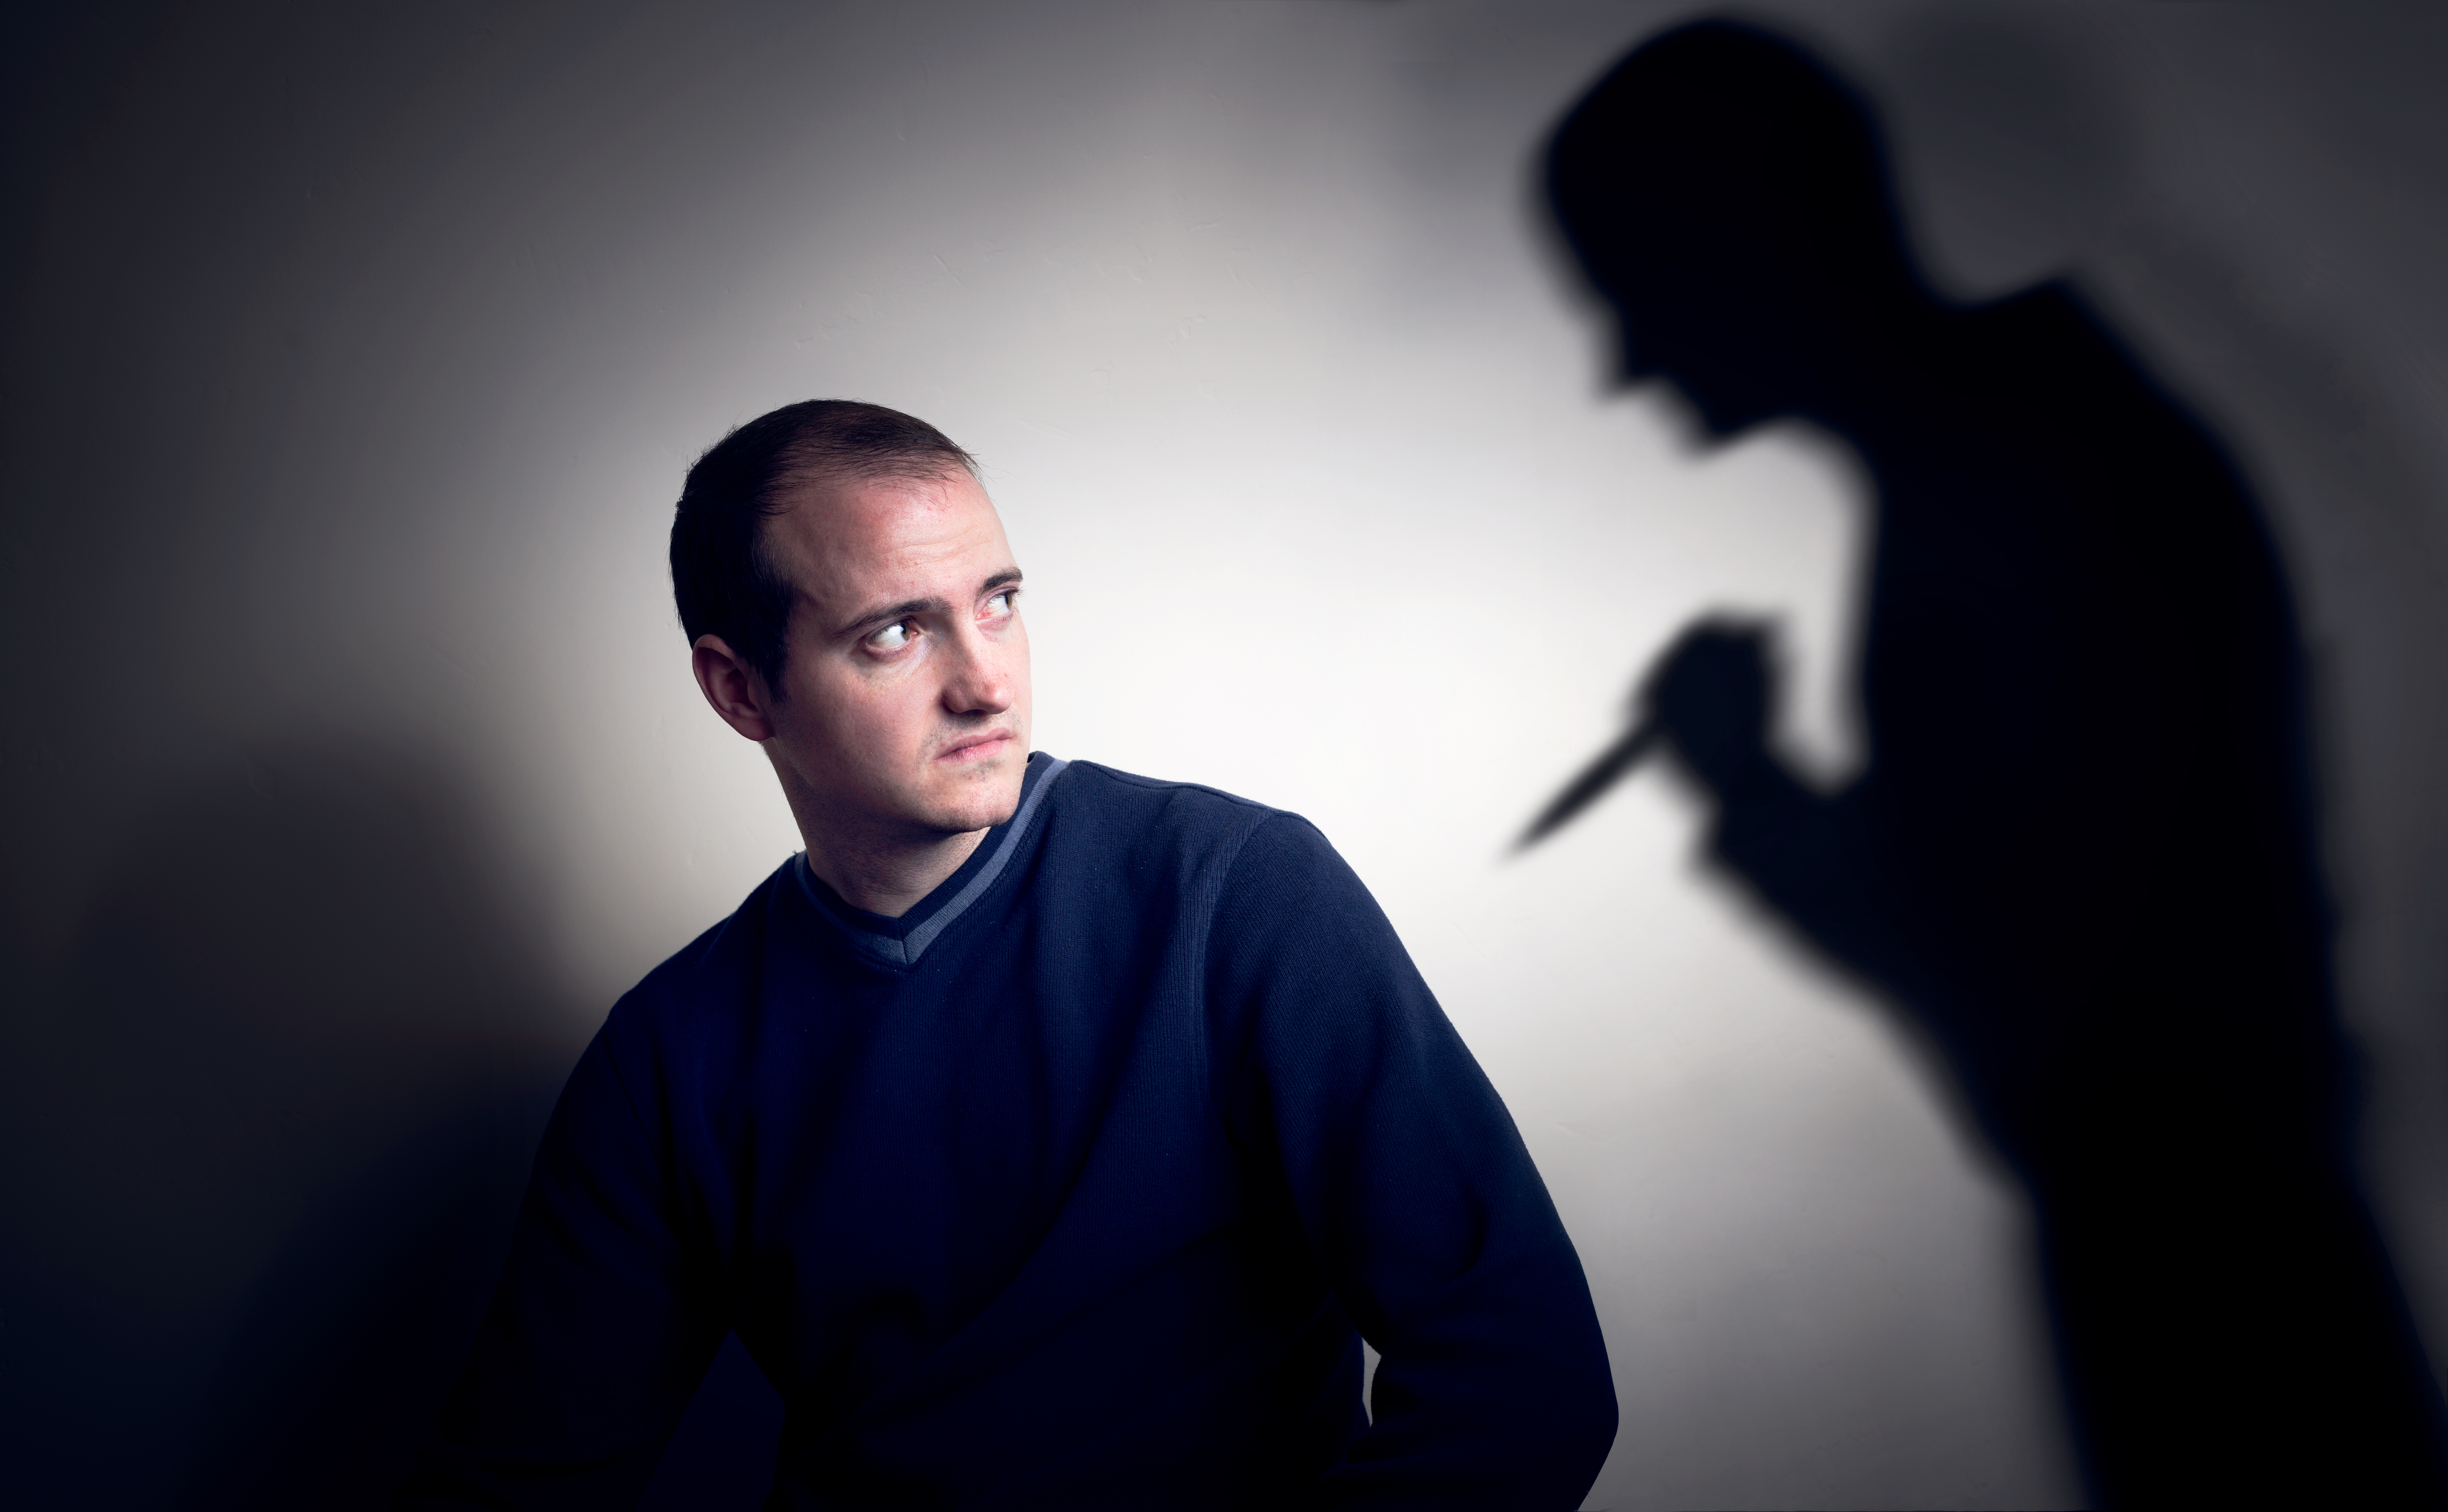 man looking afraid while shadow lurks behind him with a knife - photo by Laurence Boswell of Only Human Photography